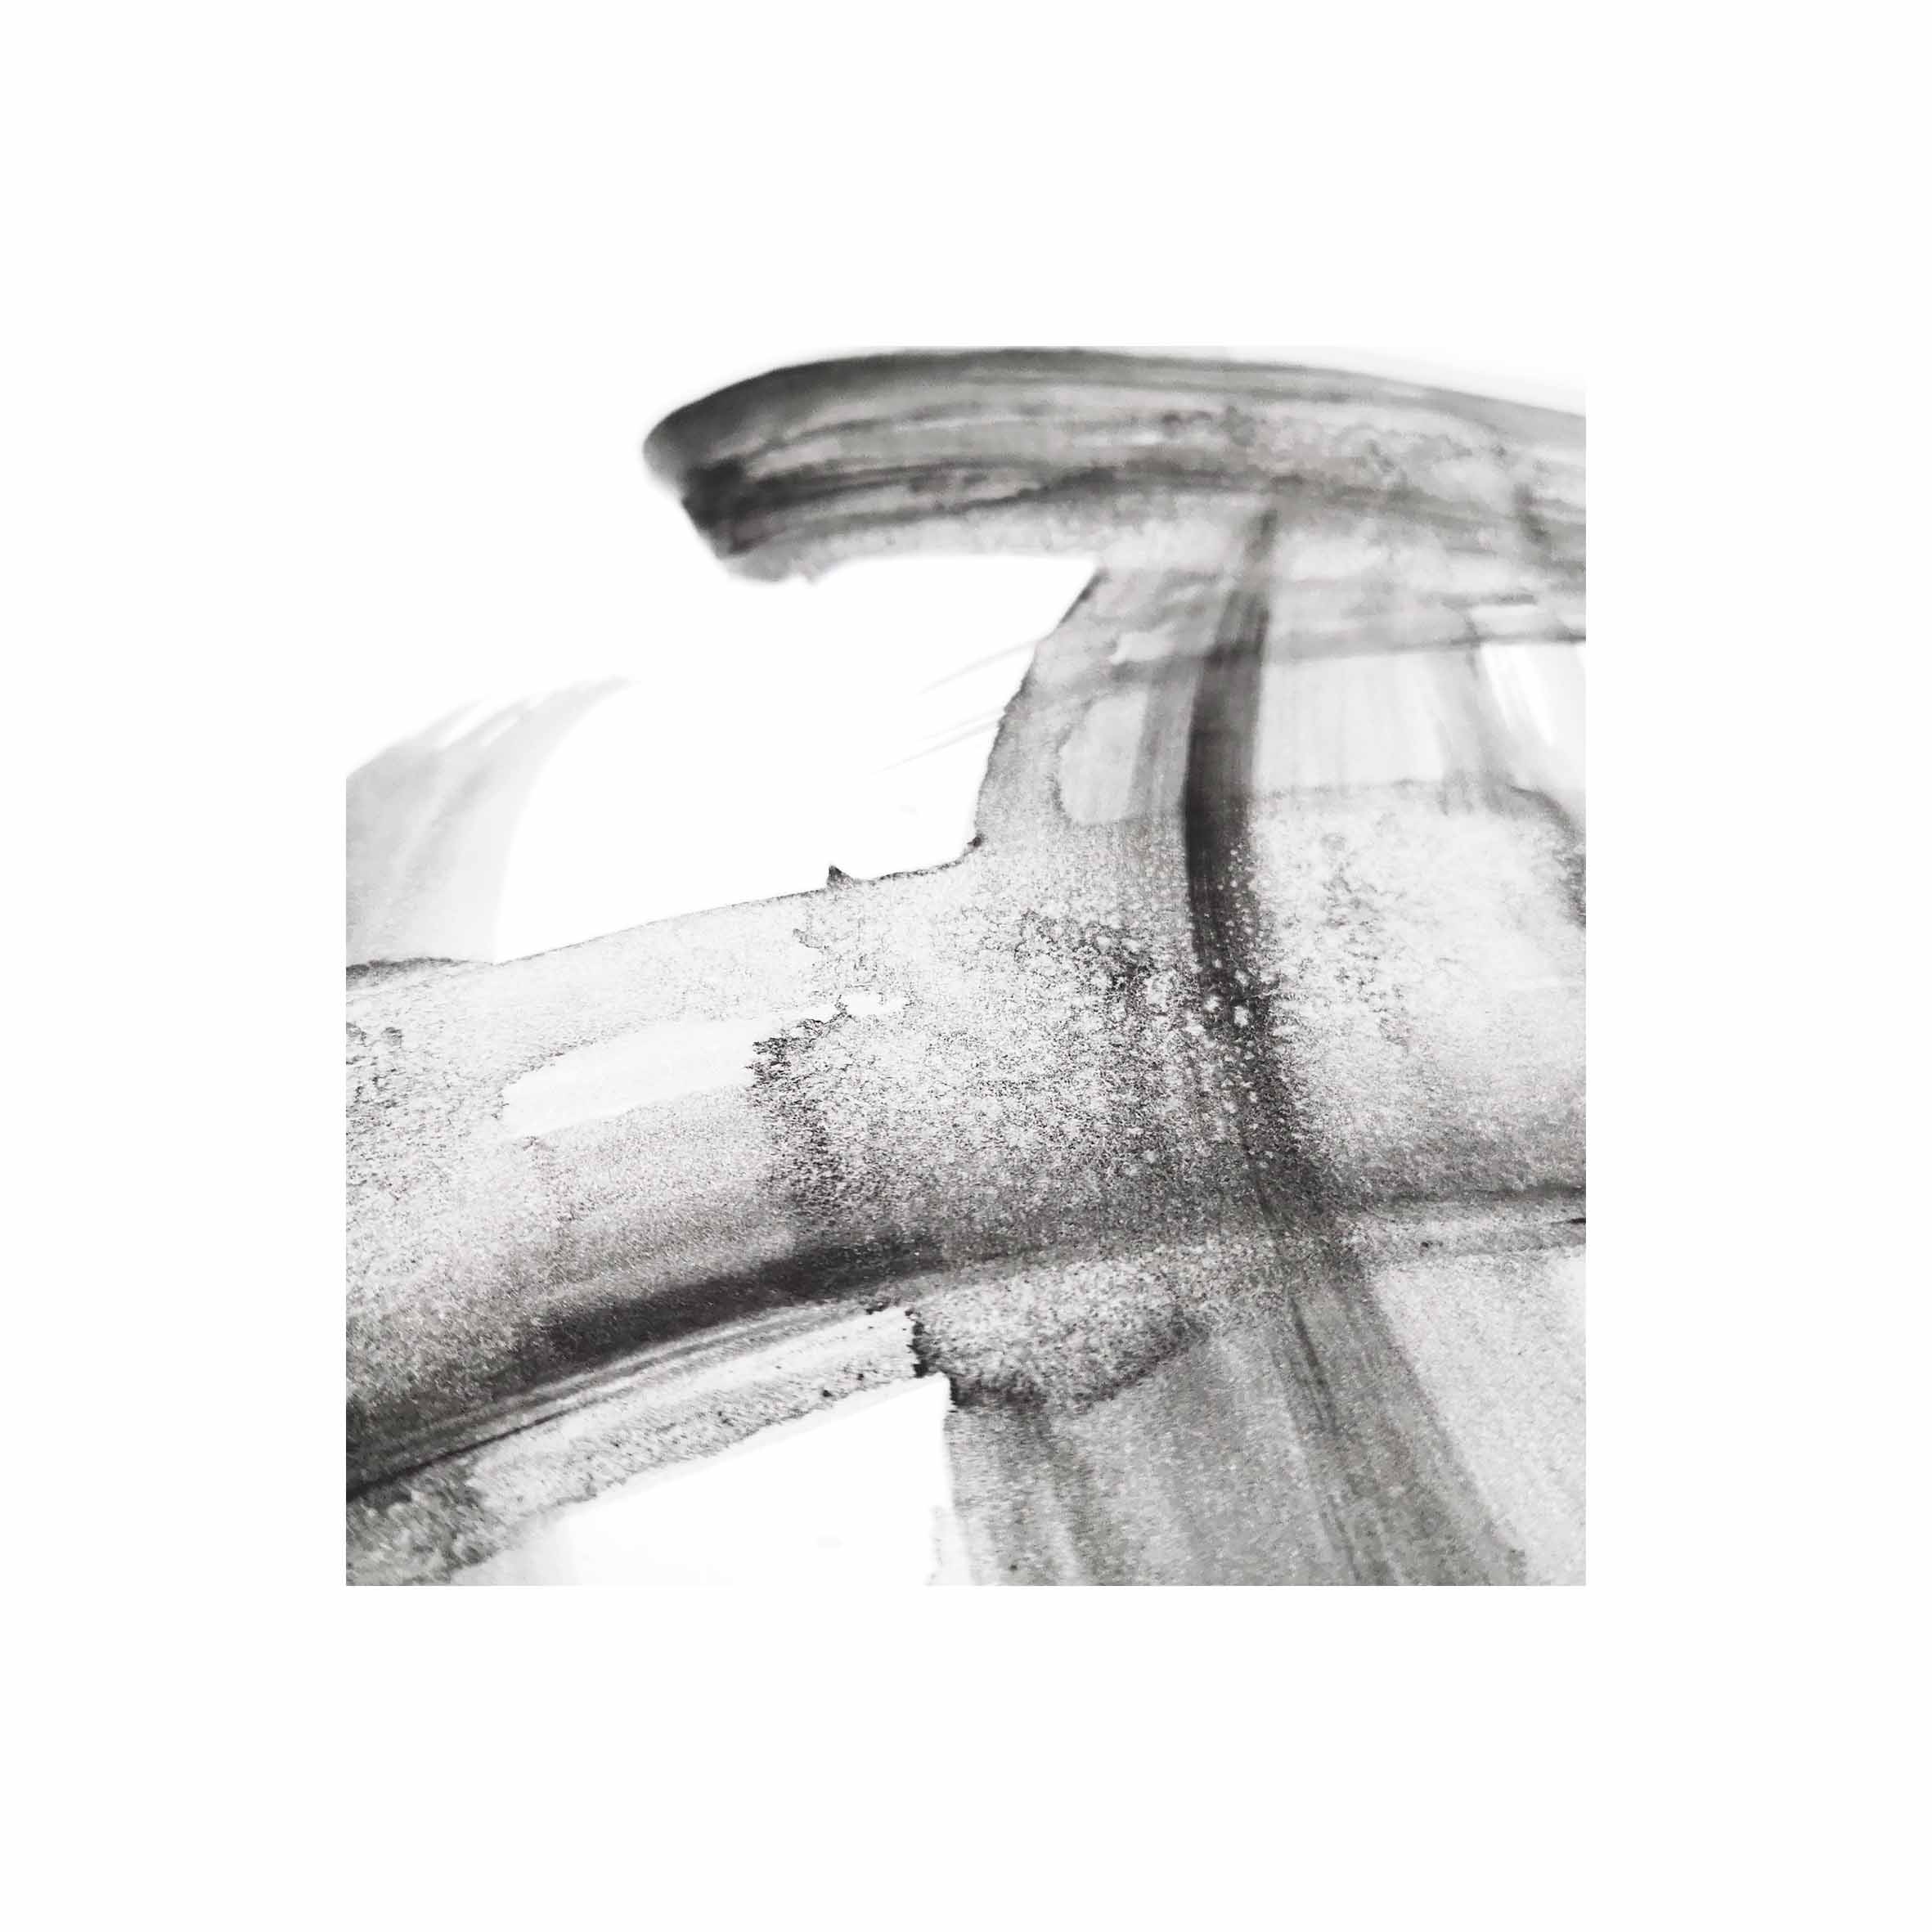 Ink smudges on paper, producing uncontrollable patterns and forming disordered and orderly aesthetic feeling with controllable structure